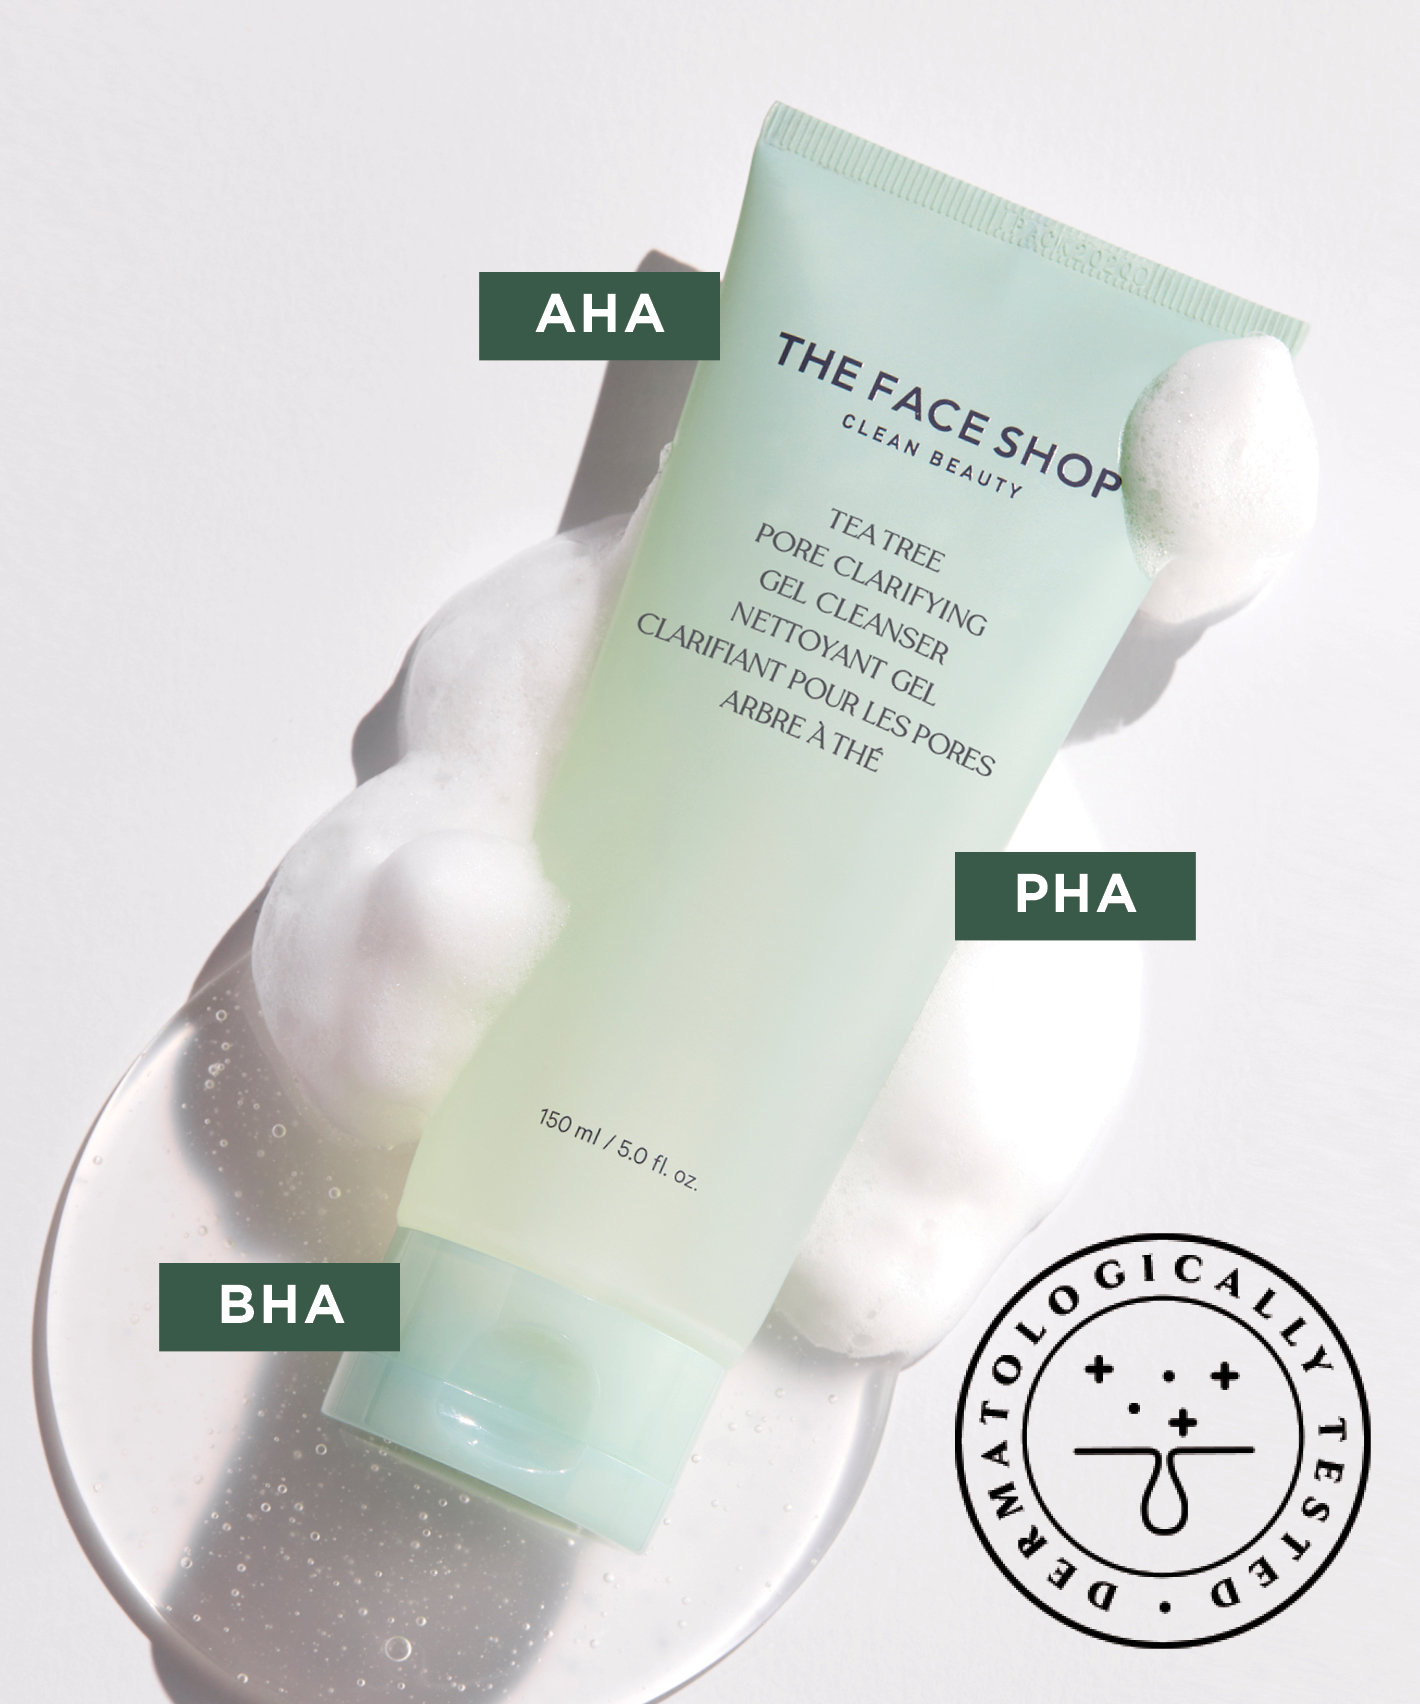 A light green tube of The Face Shop Tea Tree Pore Clarifying Gel Cleanser lying in a tiny puddle of liquid and foam on a white surface. Three abbreviations are attached to the image: AHA, PHA, BHA and also a stamp saying "Dermatologically Tested"